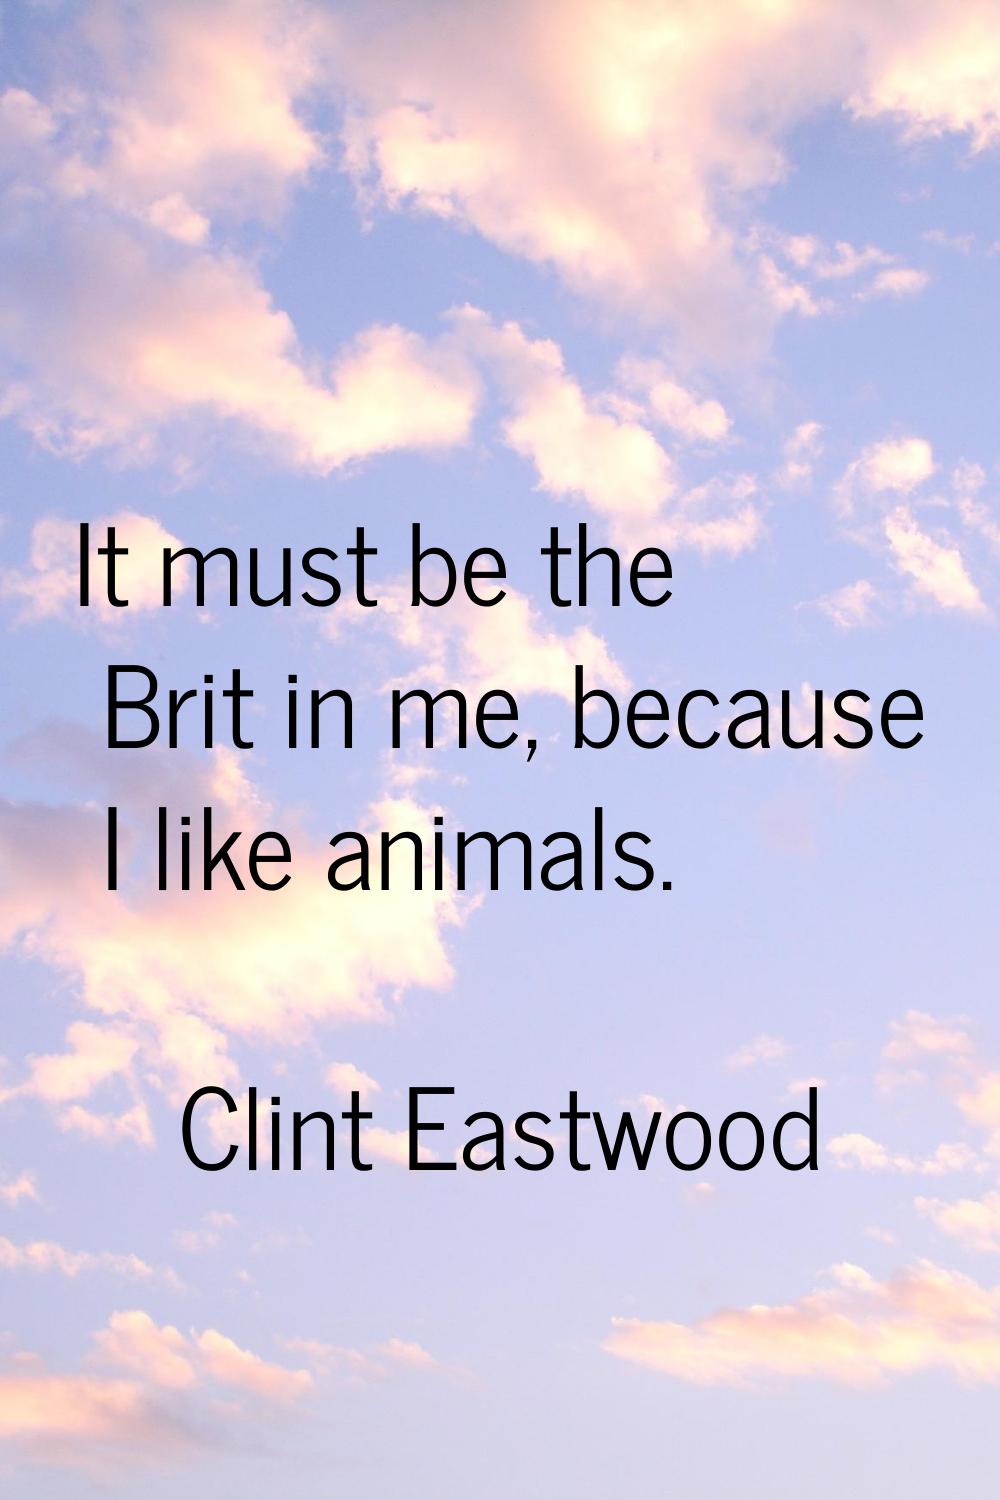 It must be the Brit in me, because I like animals.